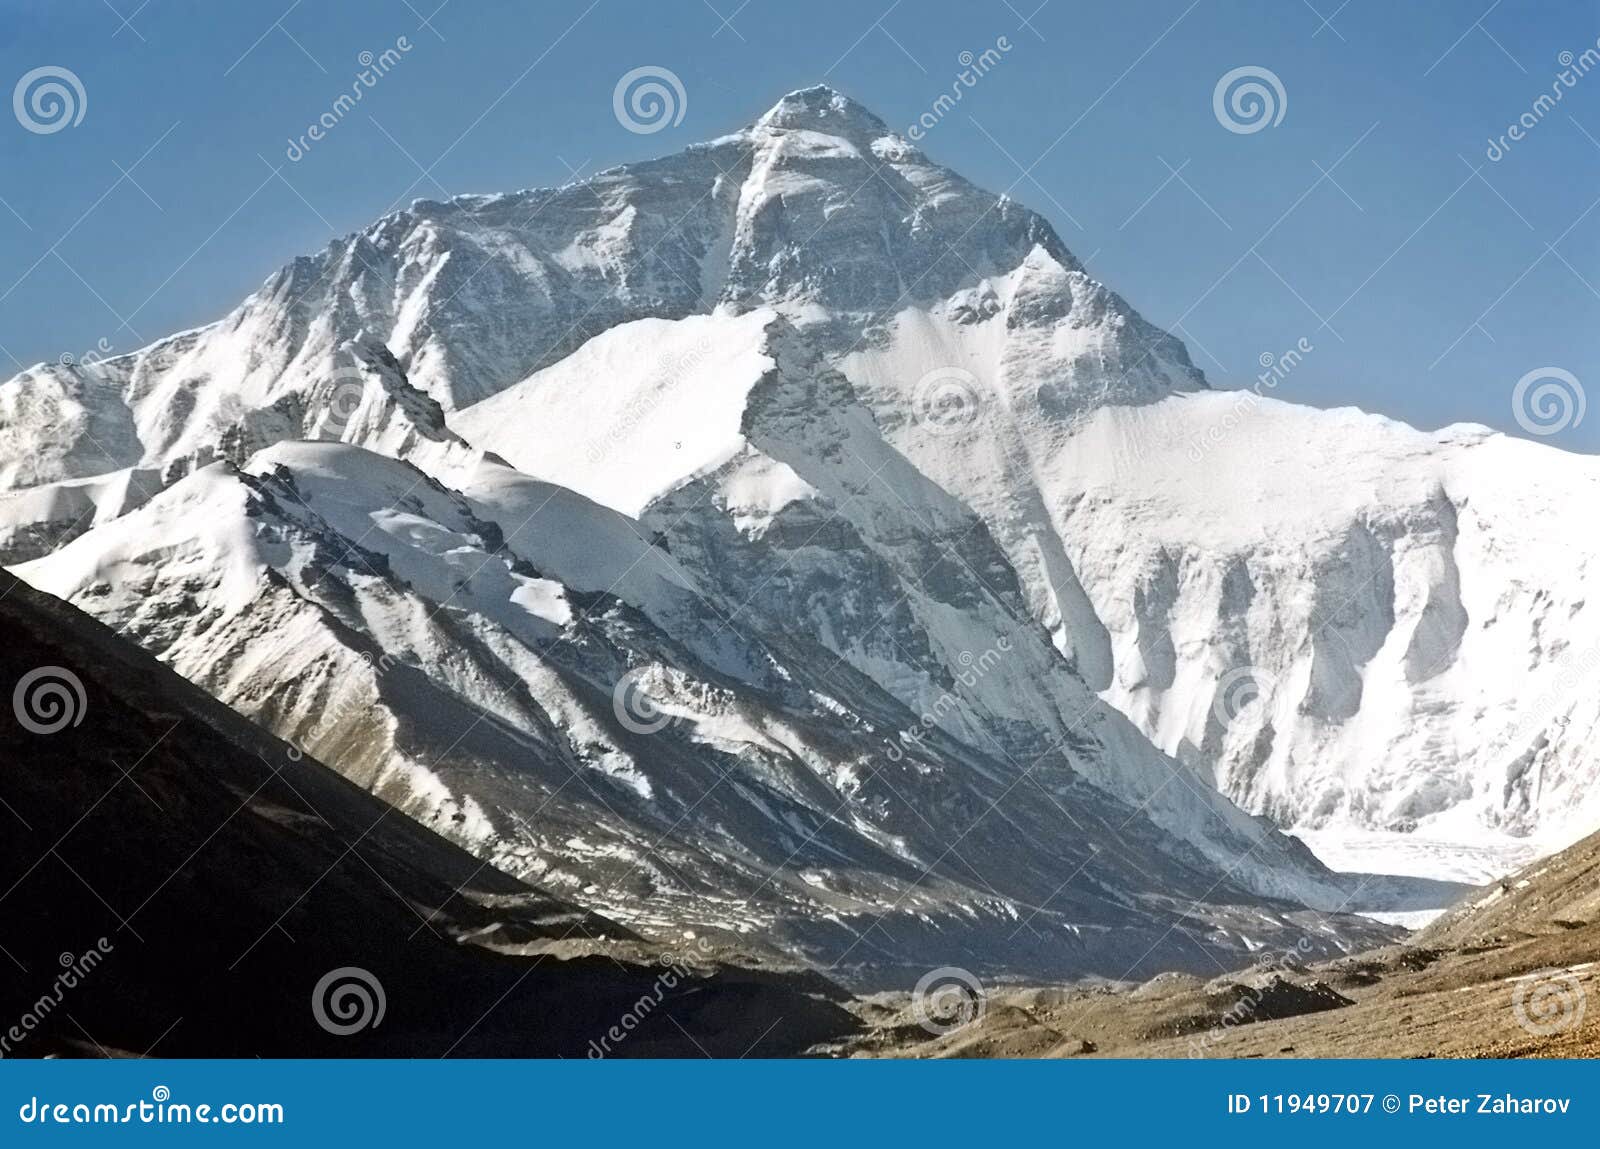 mount everest, the highest in the world, 8850m.